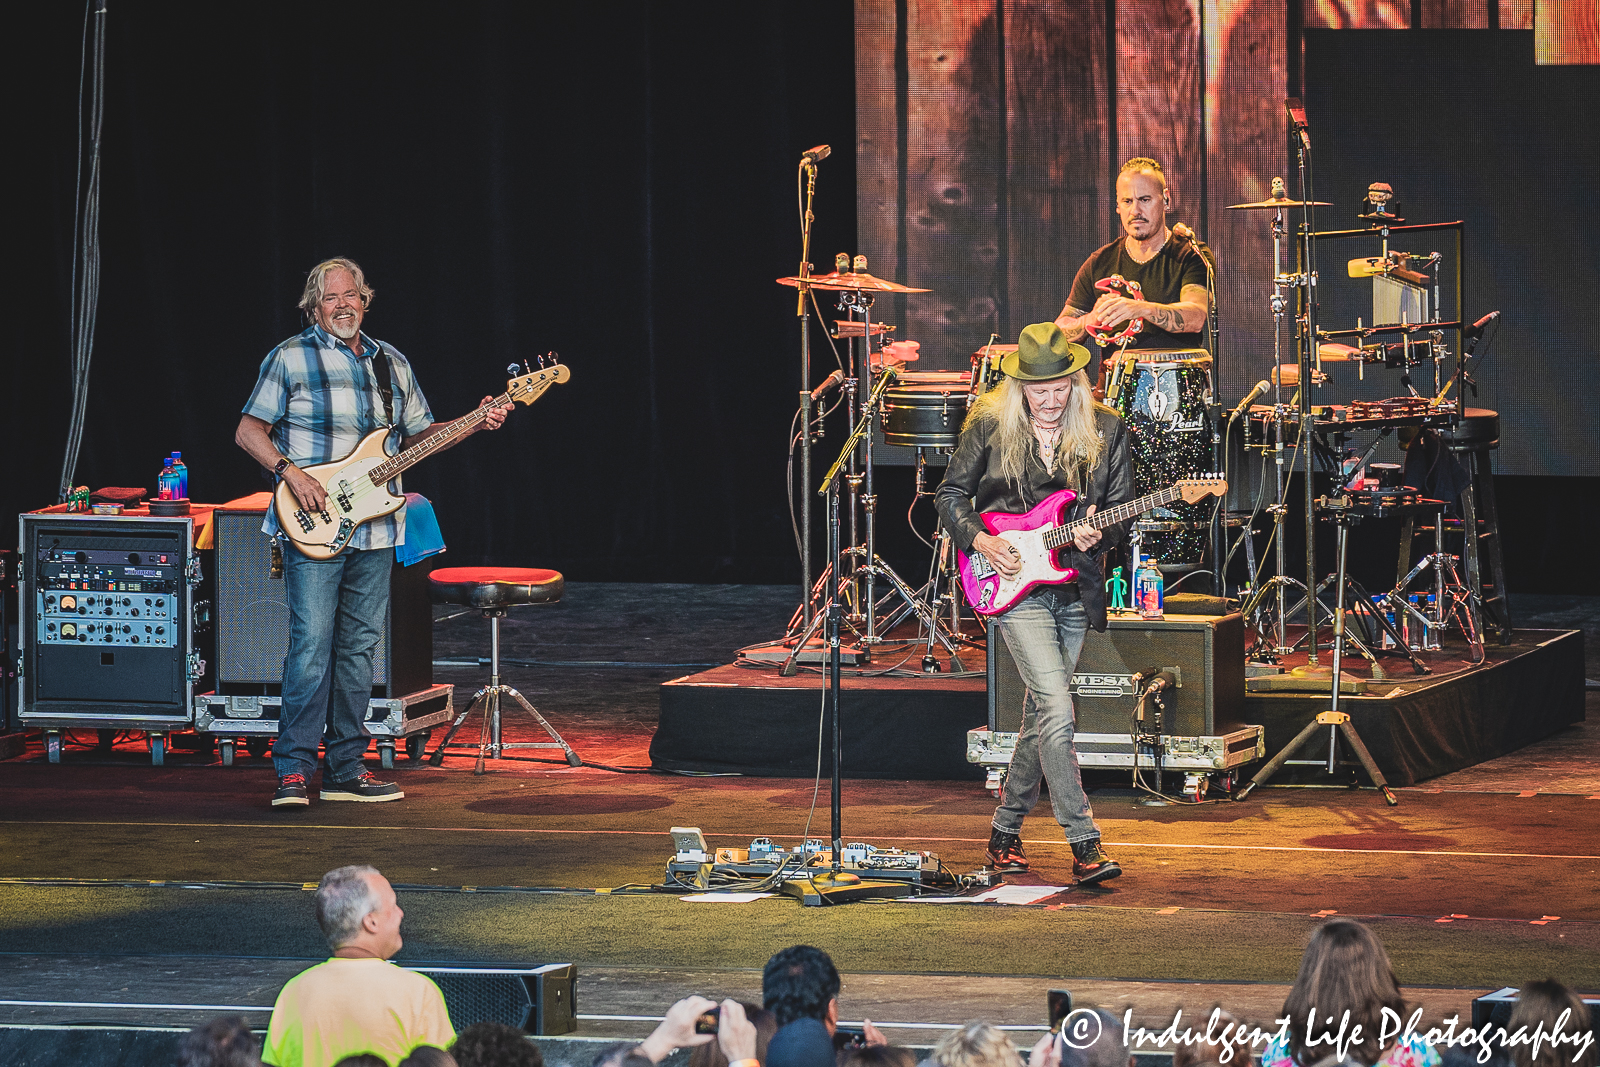 Founding member Patrick Simmons of The Doobie Brothers along with touring members John Cowan on bass and Marc Quiñones on percussion at Starlight Theatre in Kansas City, MO on June 14, 2023.